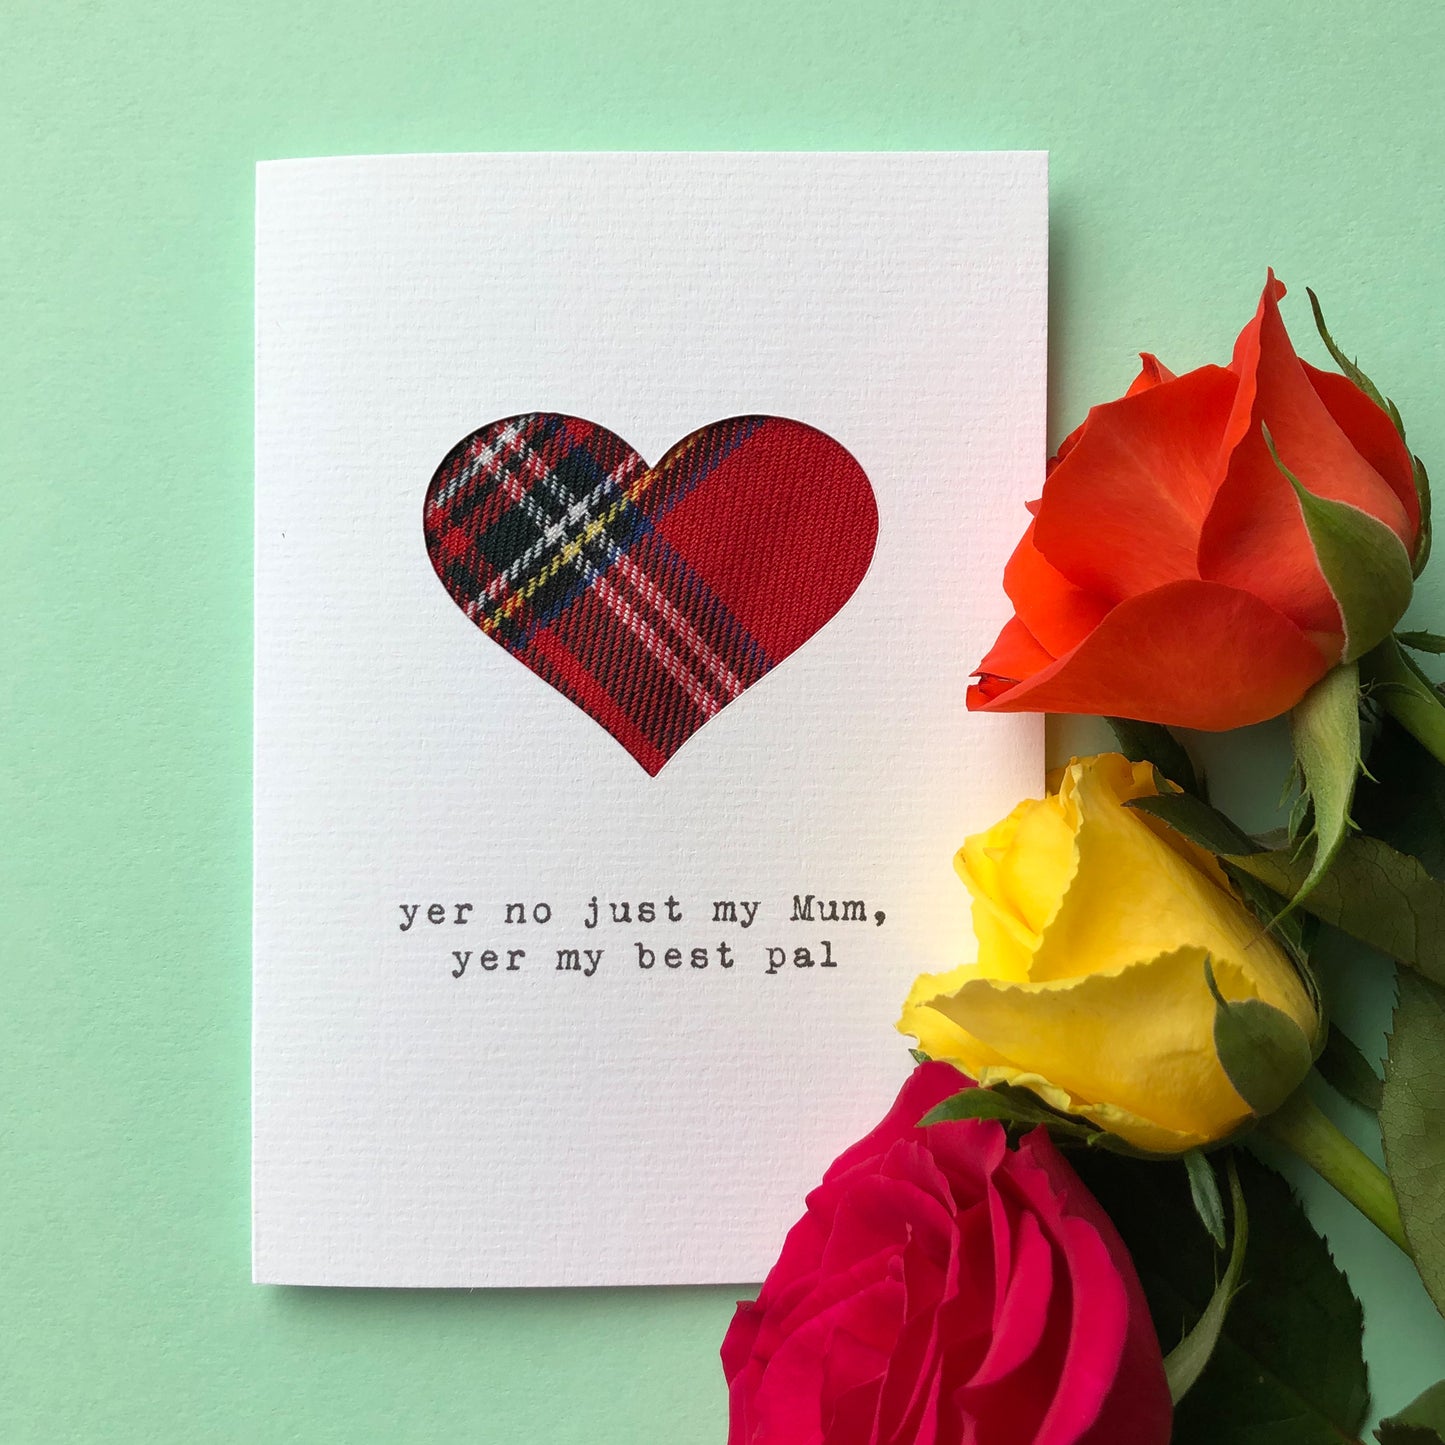 'Yer No Just My Mum, Yer My Best Pal' Scottish Mother's Day Card - HiyaPal